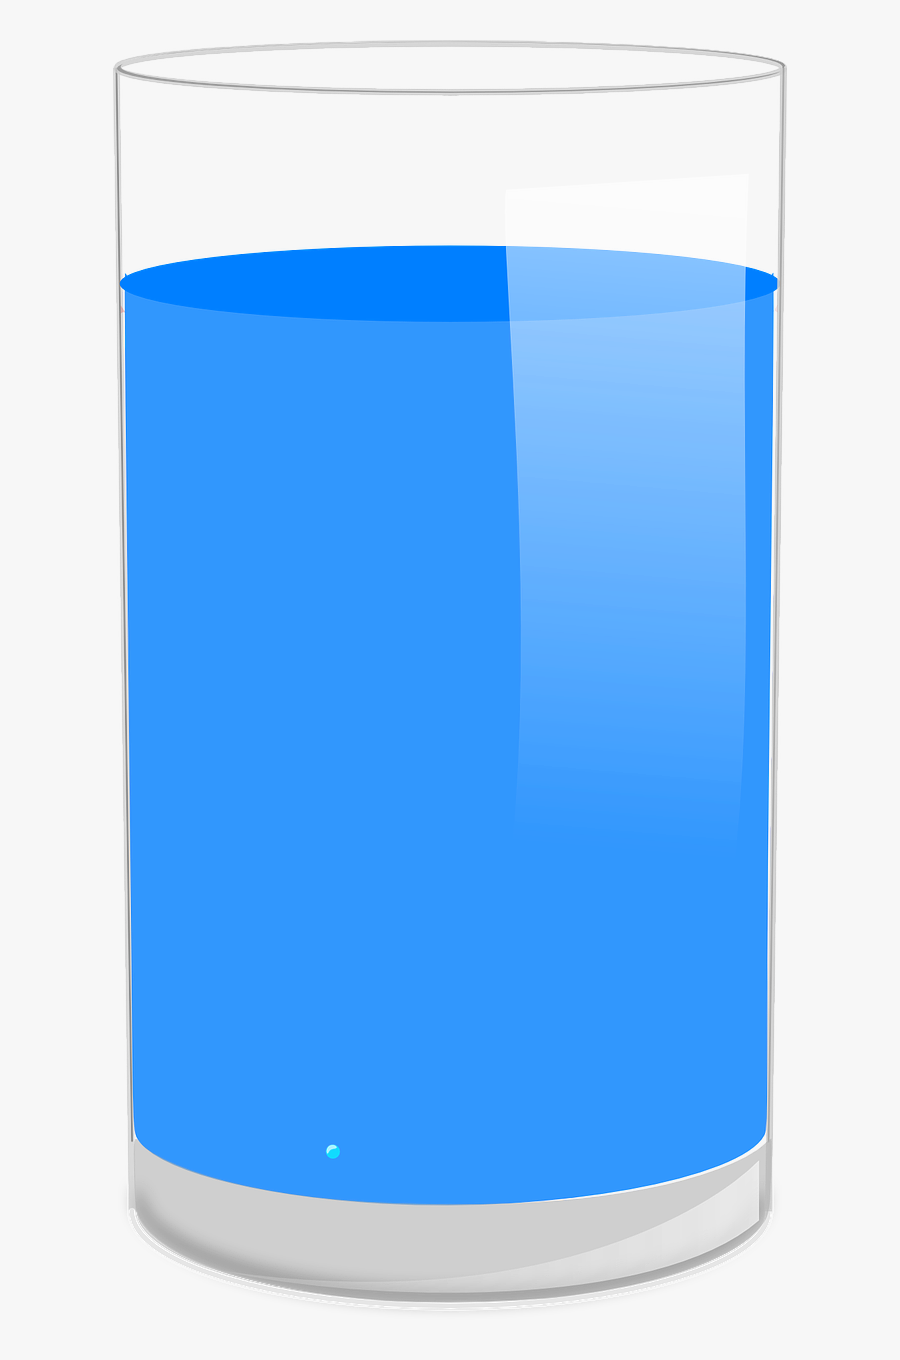 Glass Water Full Free Picture - Water In Glass Animated, free clipart downl...